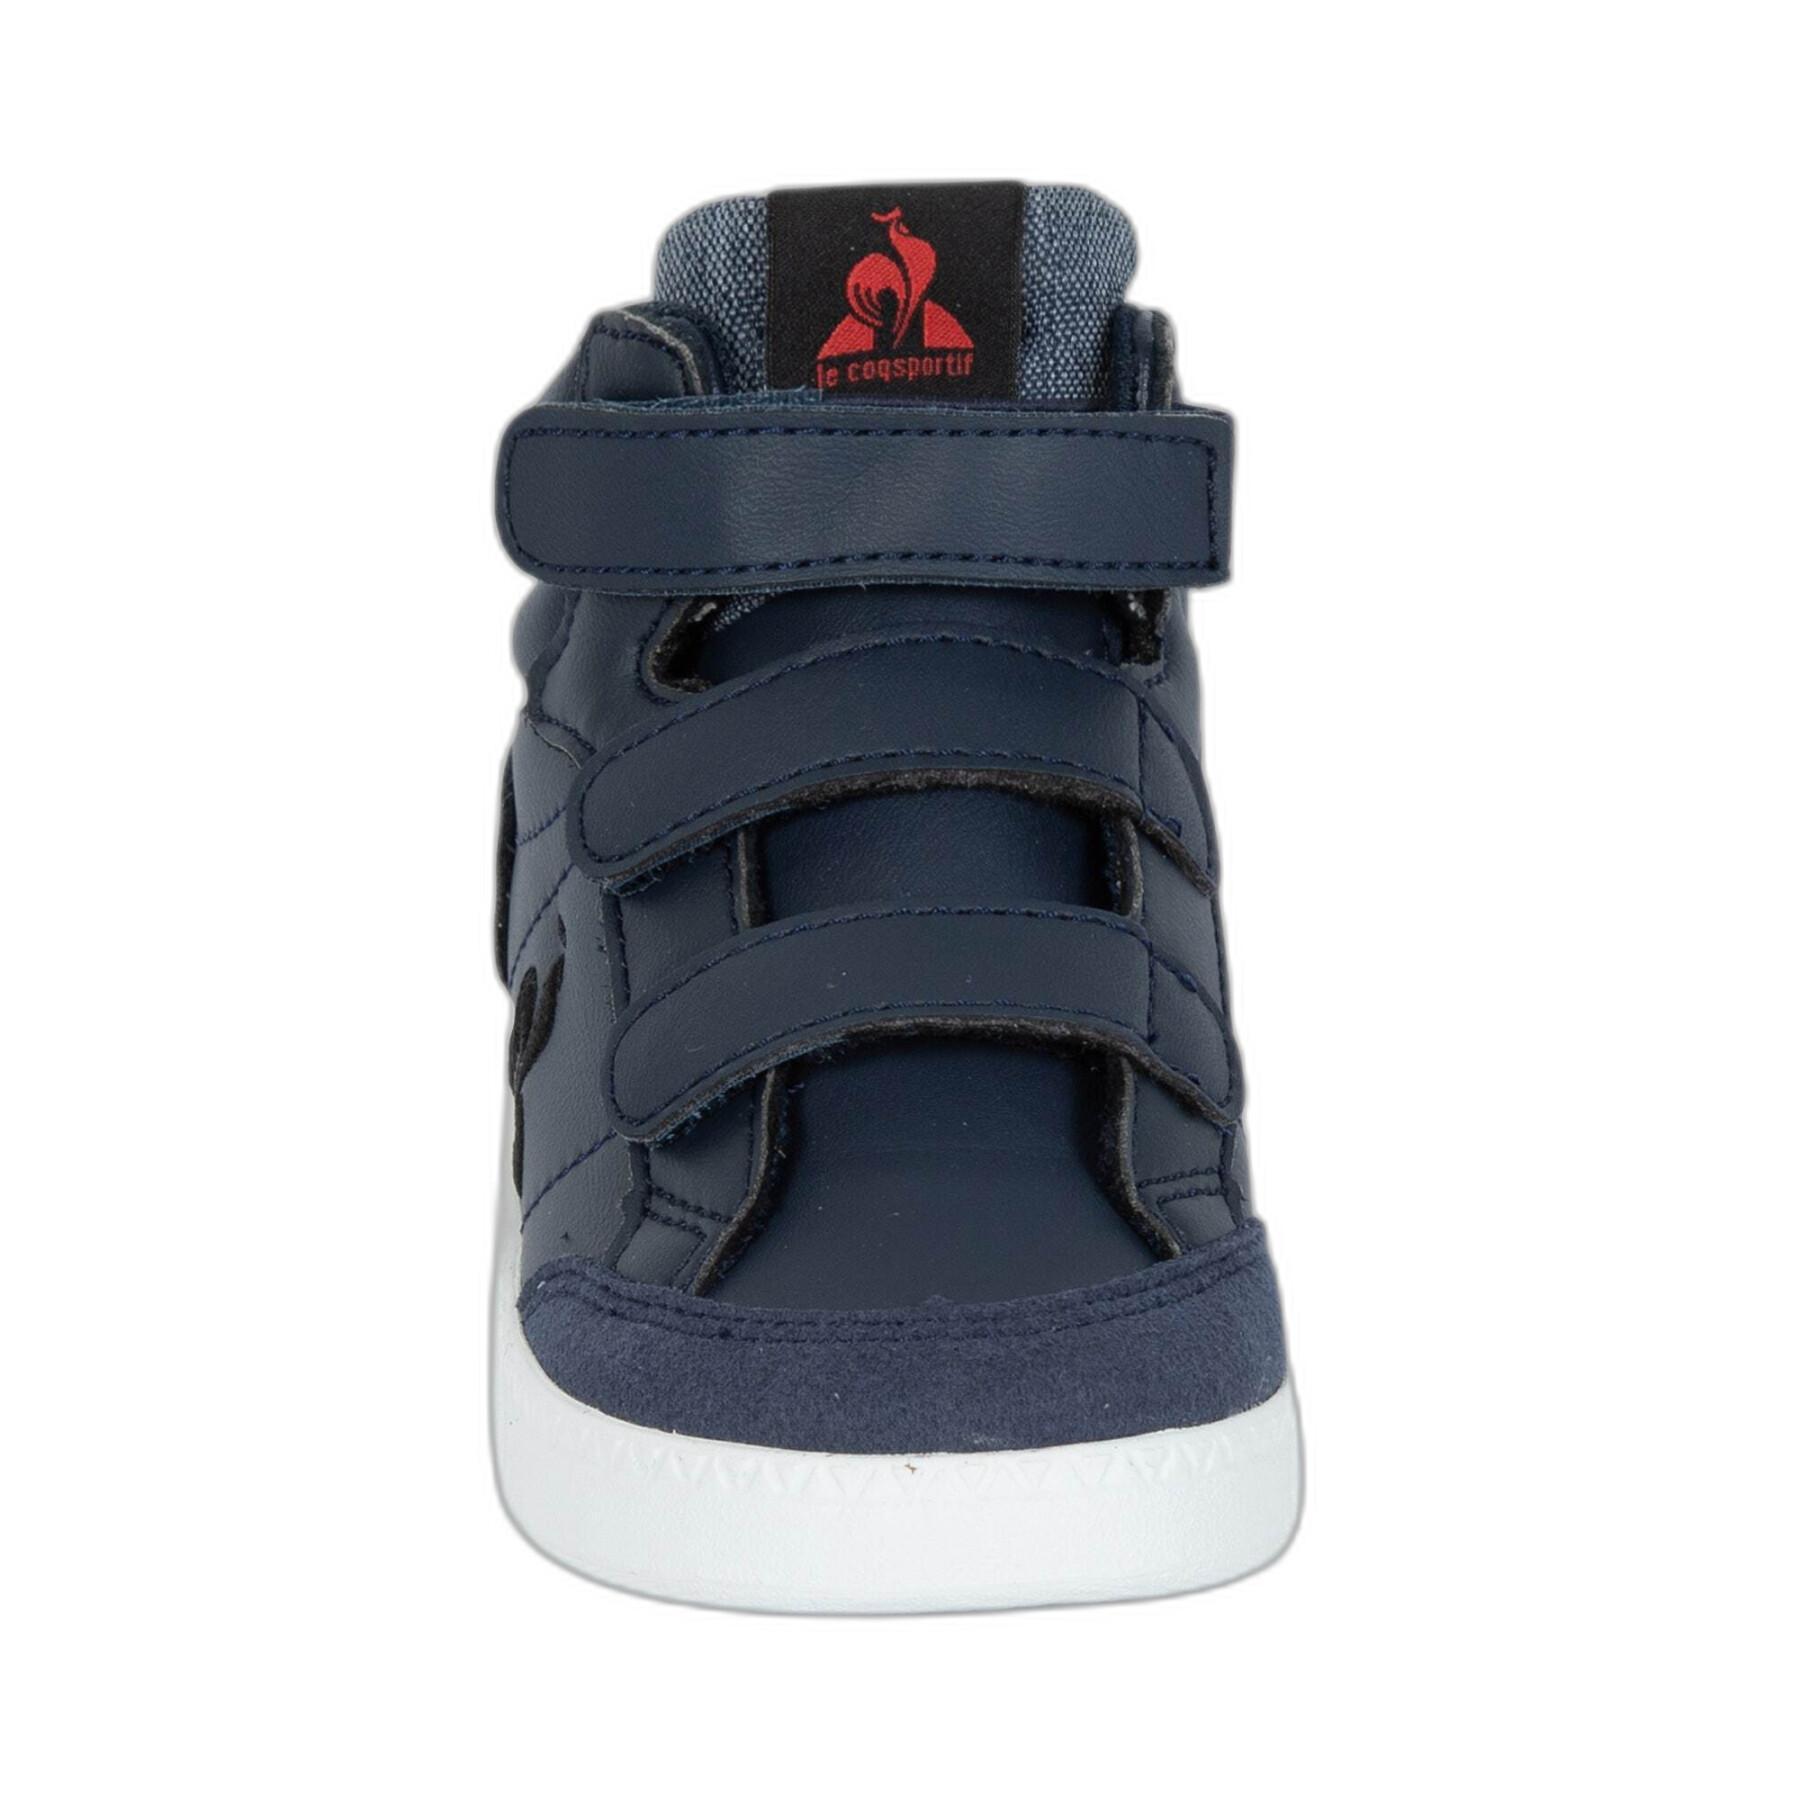 Kindertrainers Le Coq Sportif Arena Inf Workwear